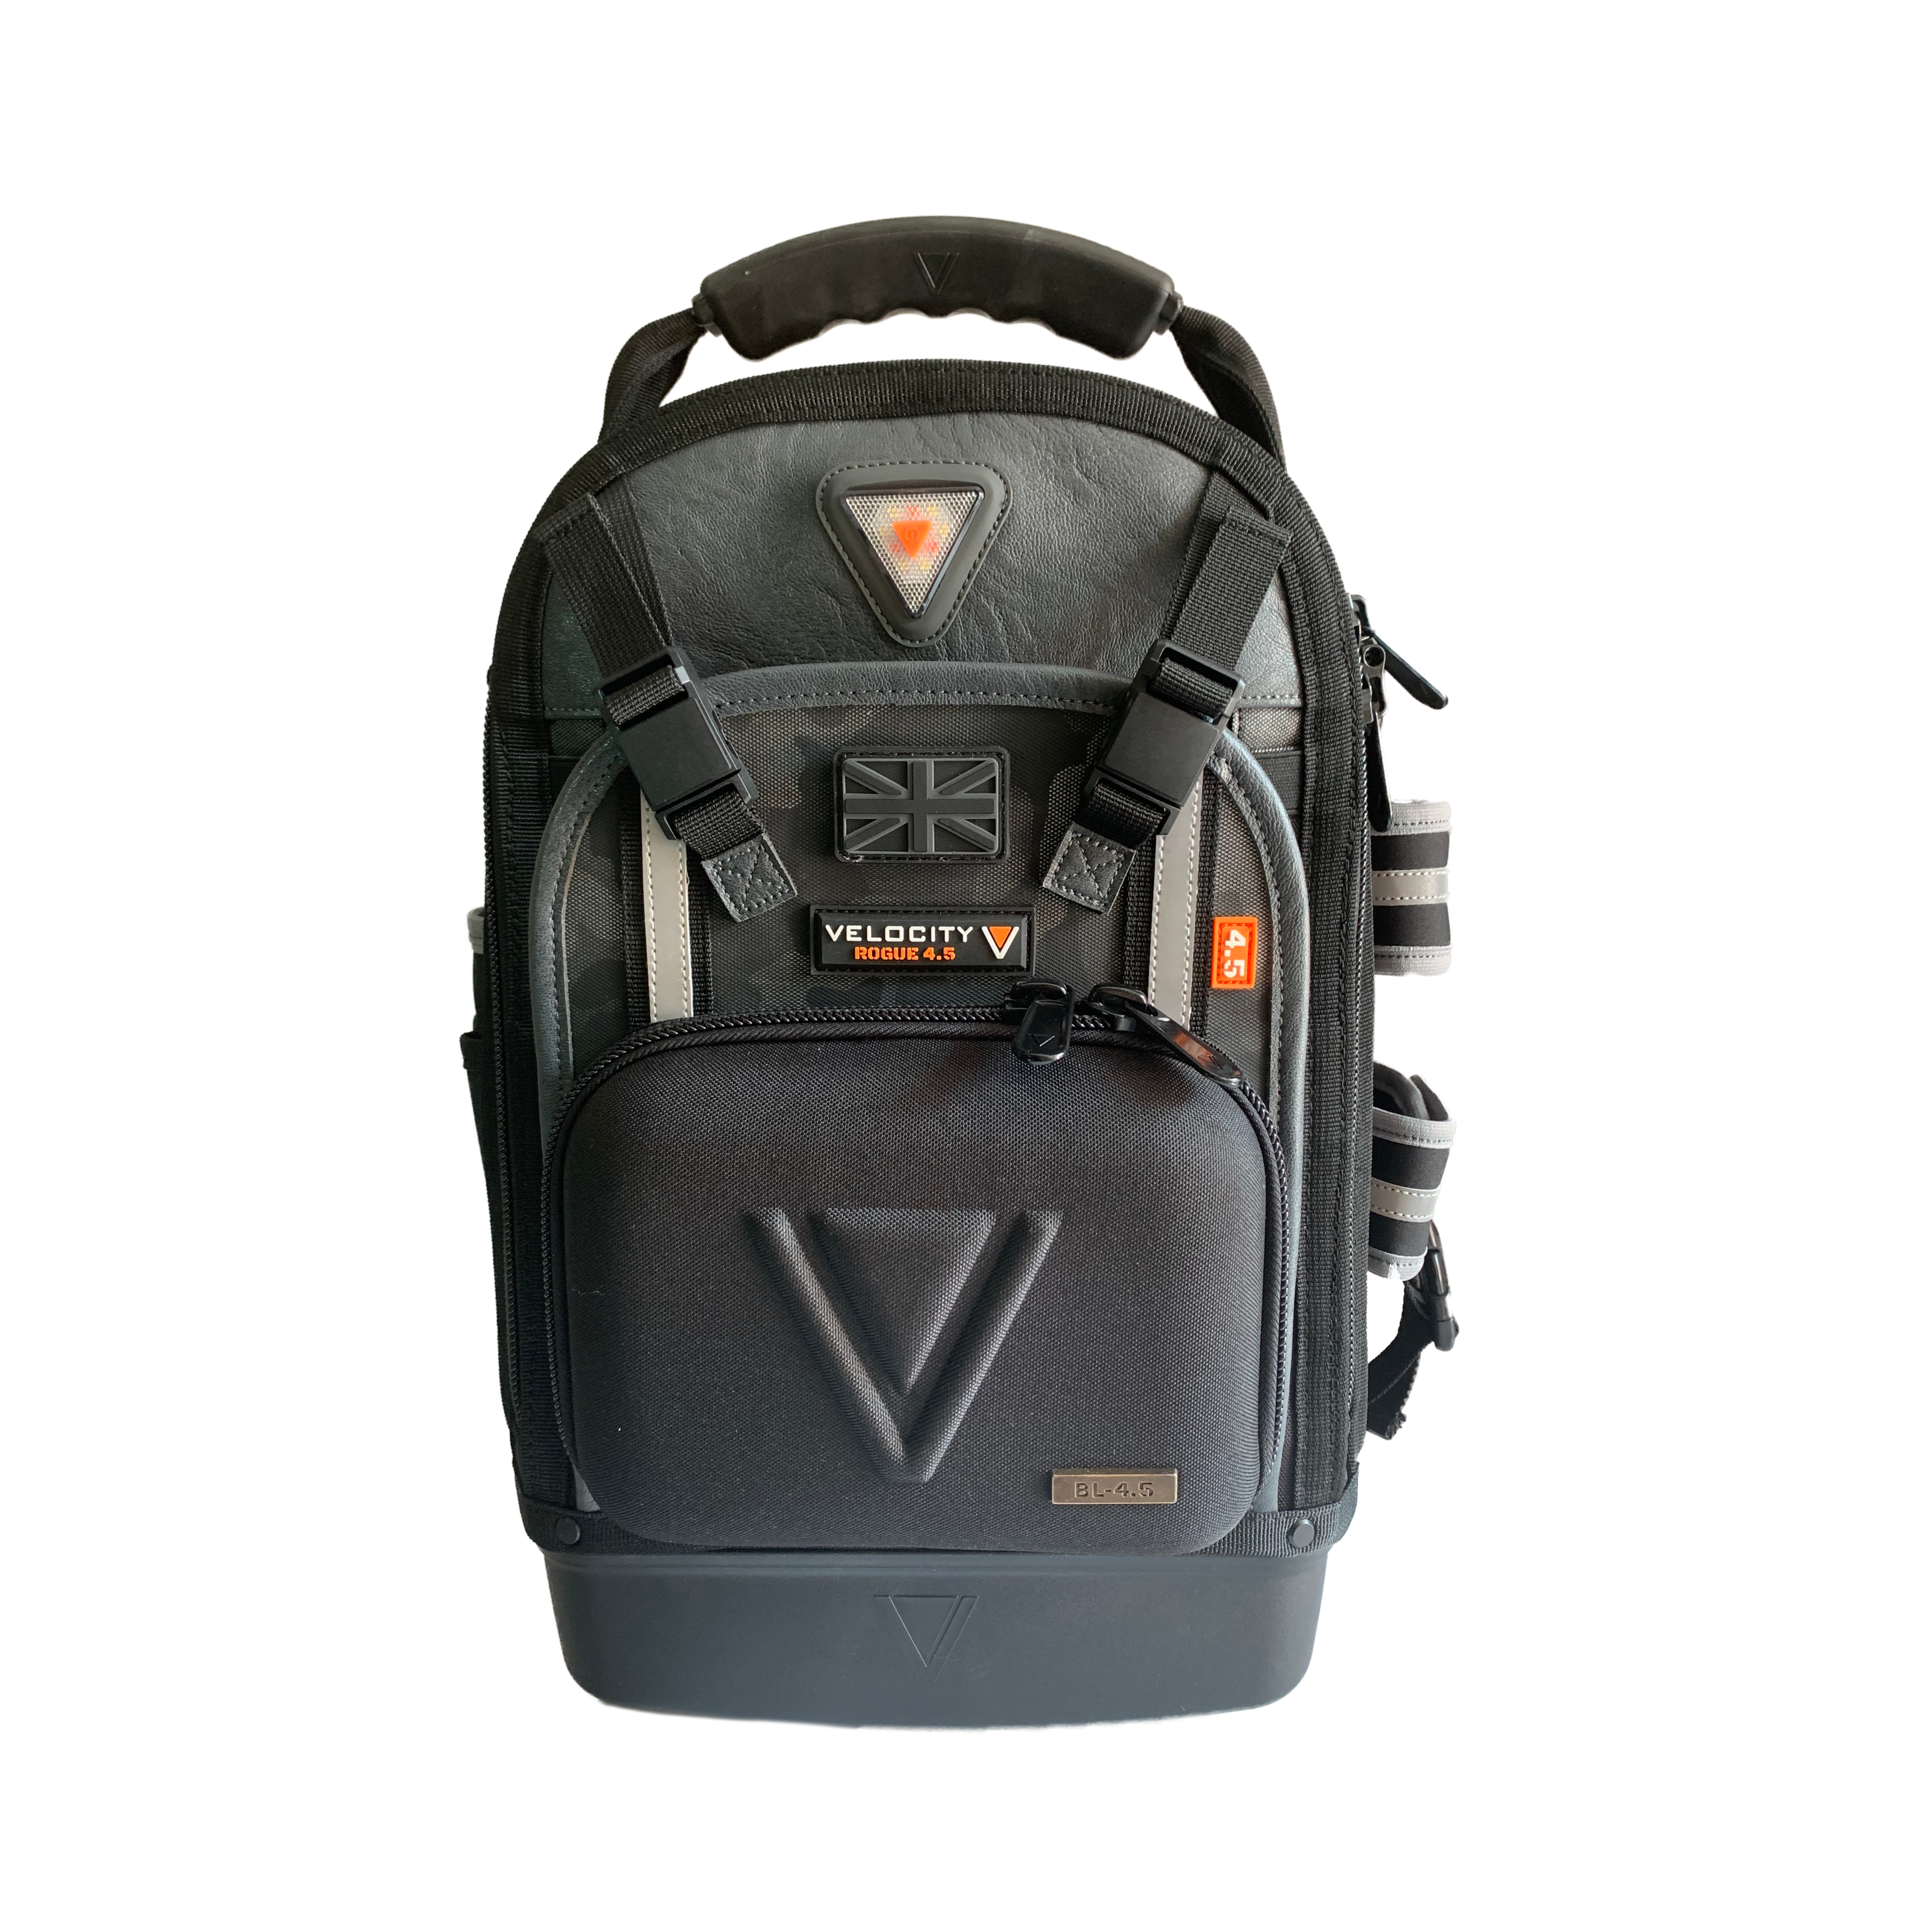 Rogue 4.5 Backpack Lite & Free Cooler